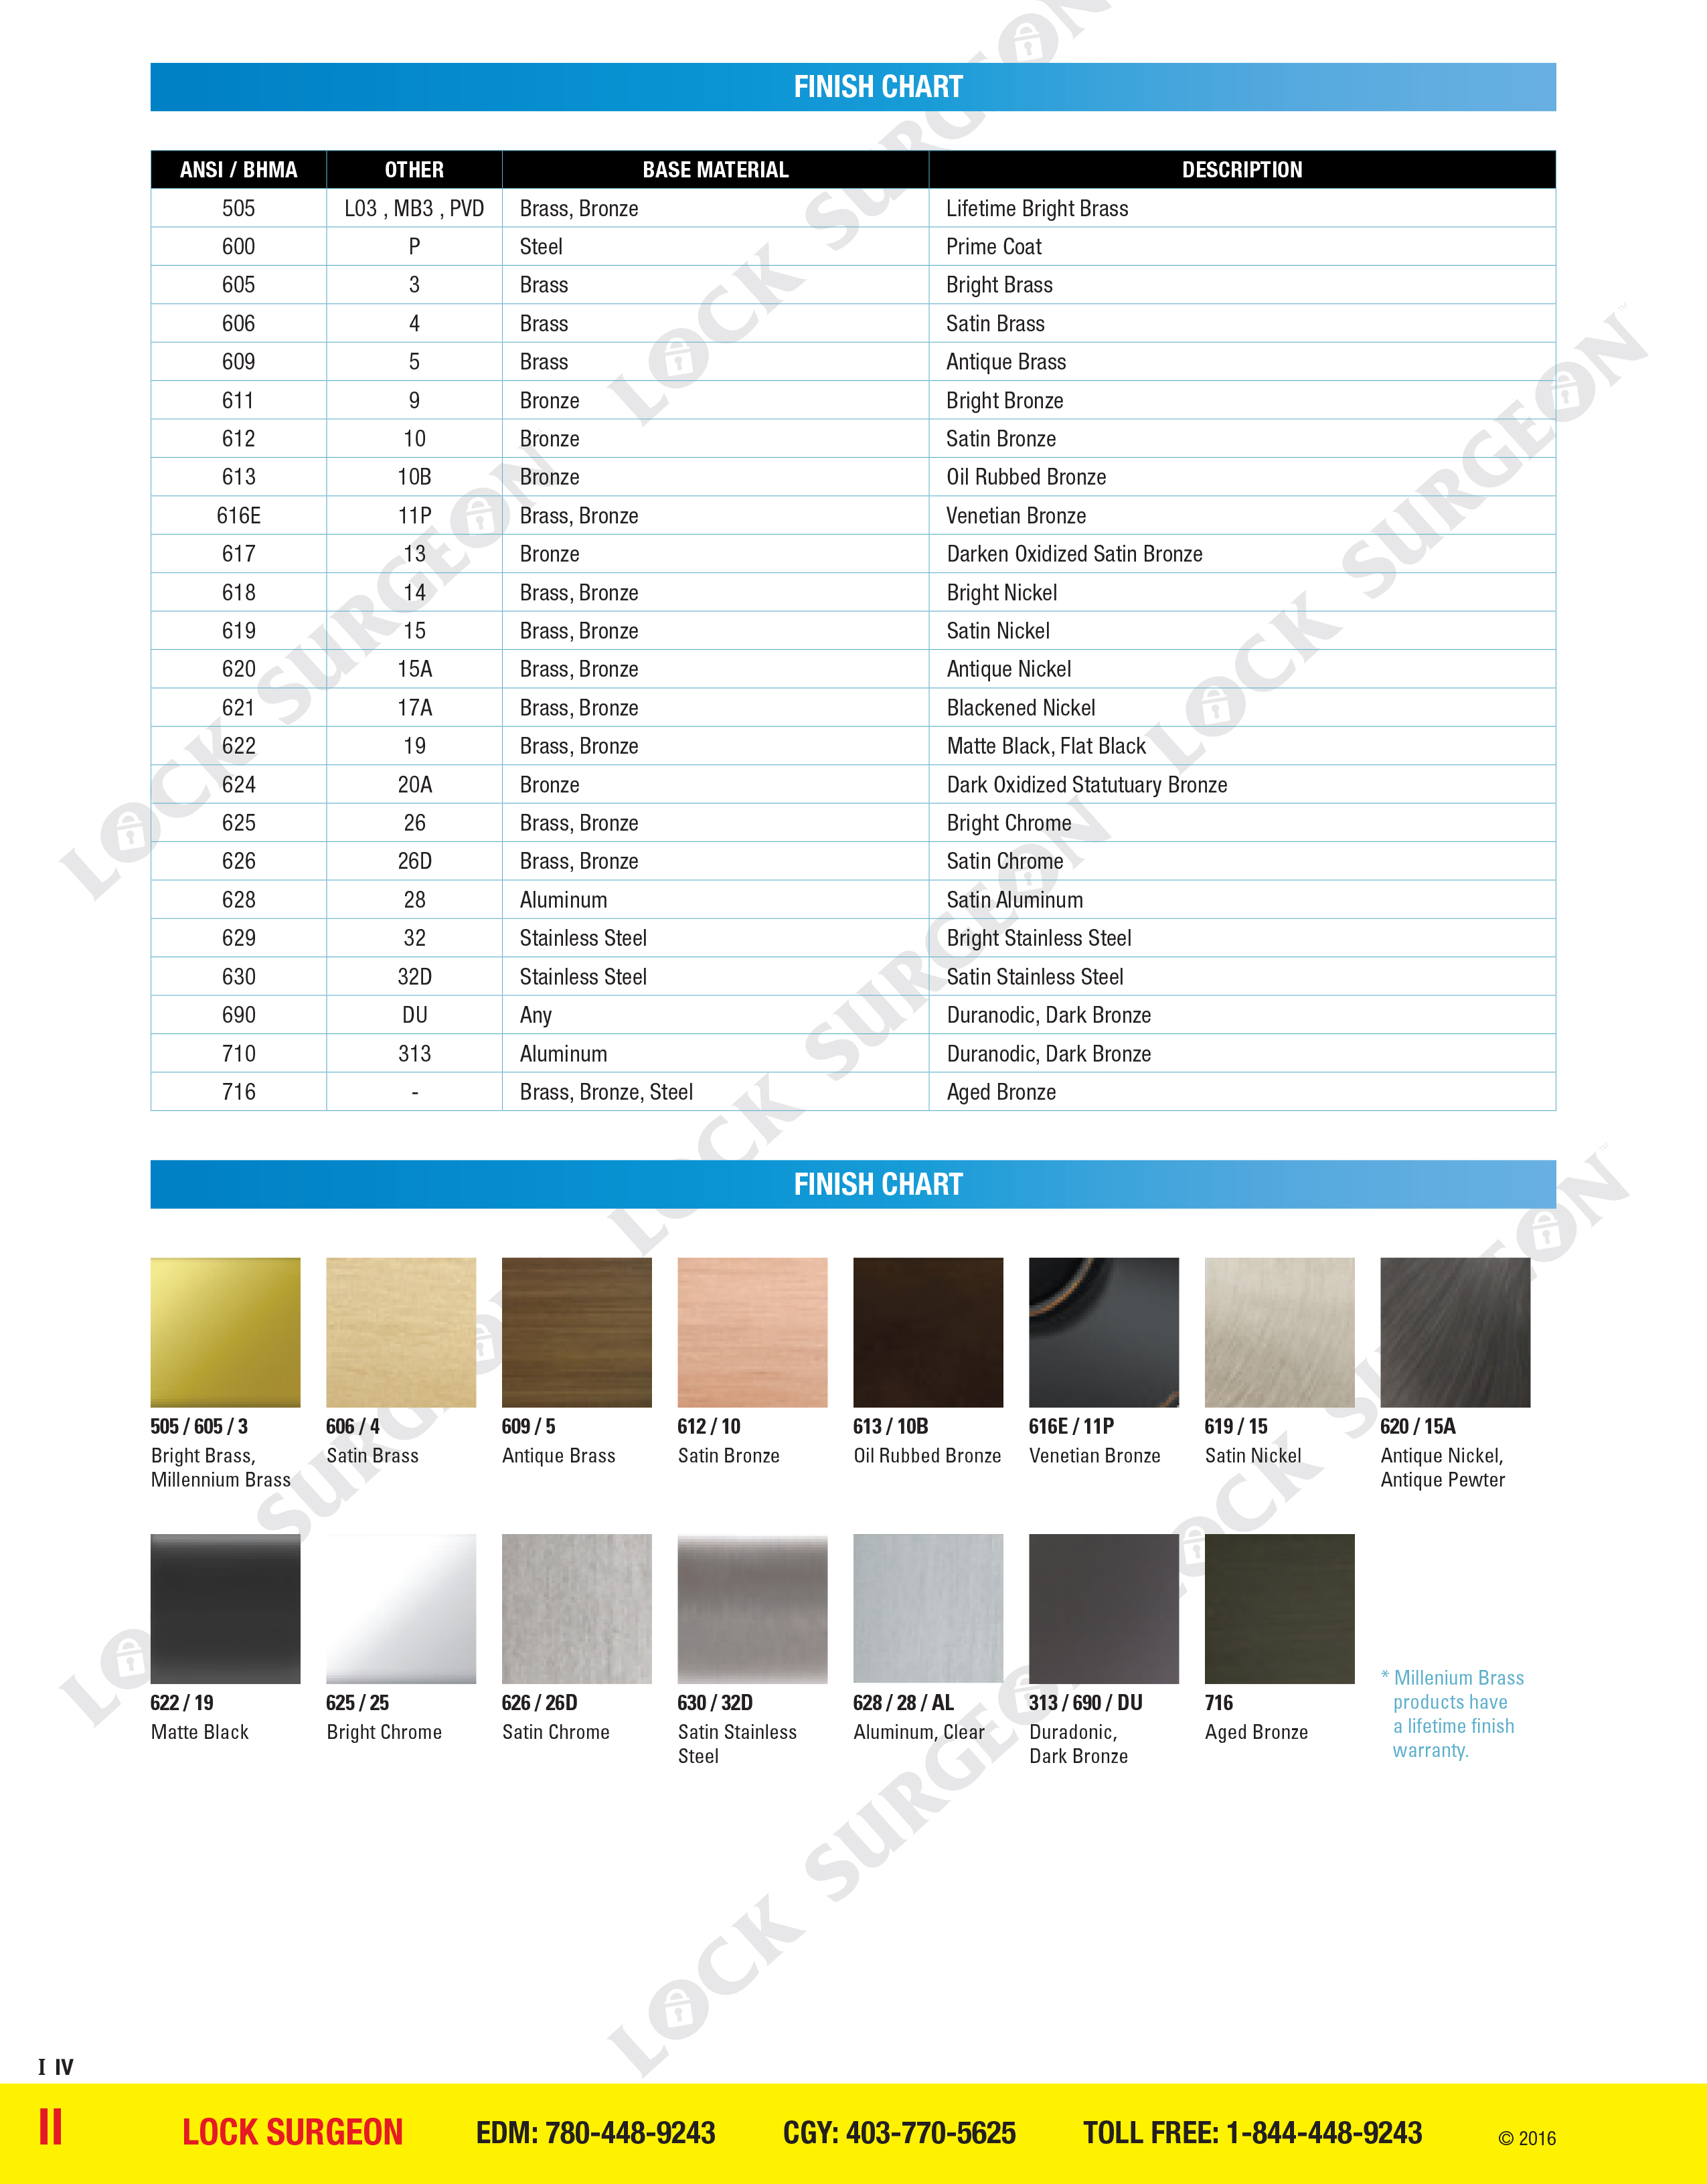 Colour finishes available in many varieties.